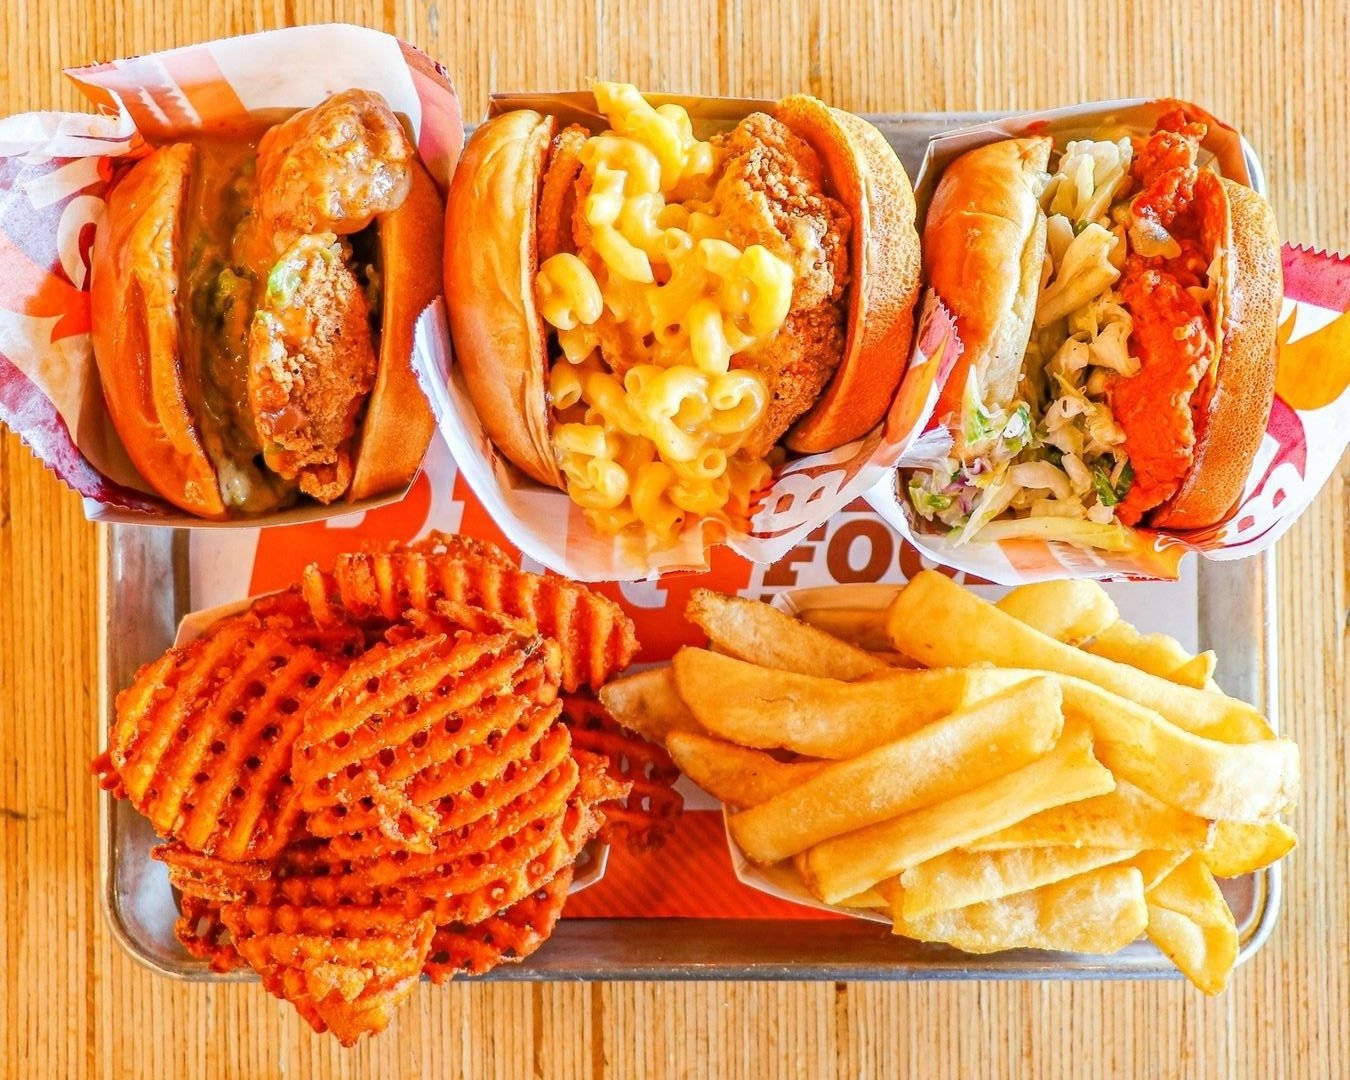 An Extra-large Feast - High Servings Of Fast Food Wallpaper